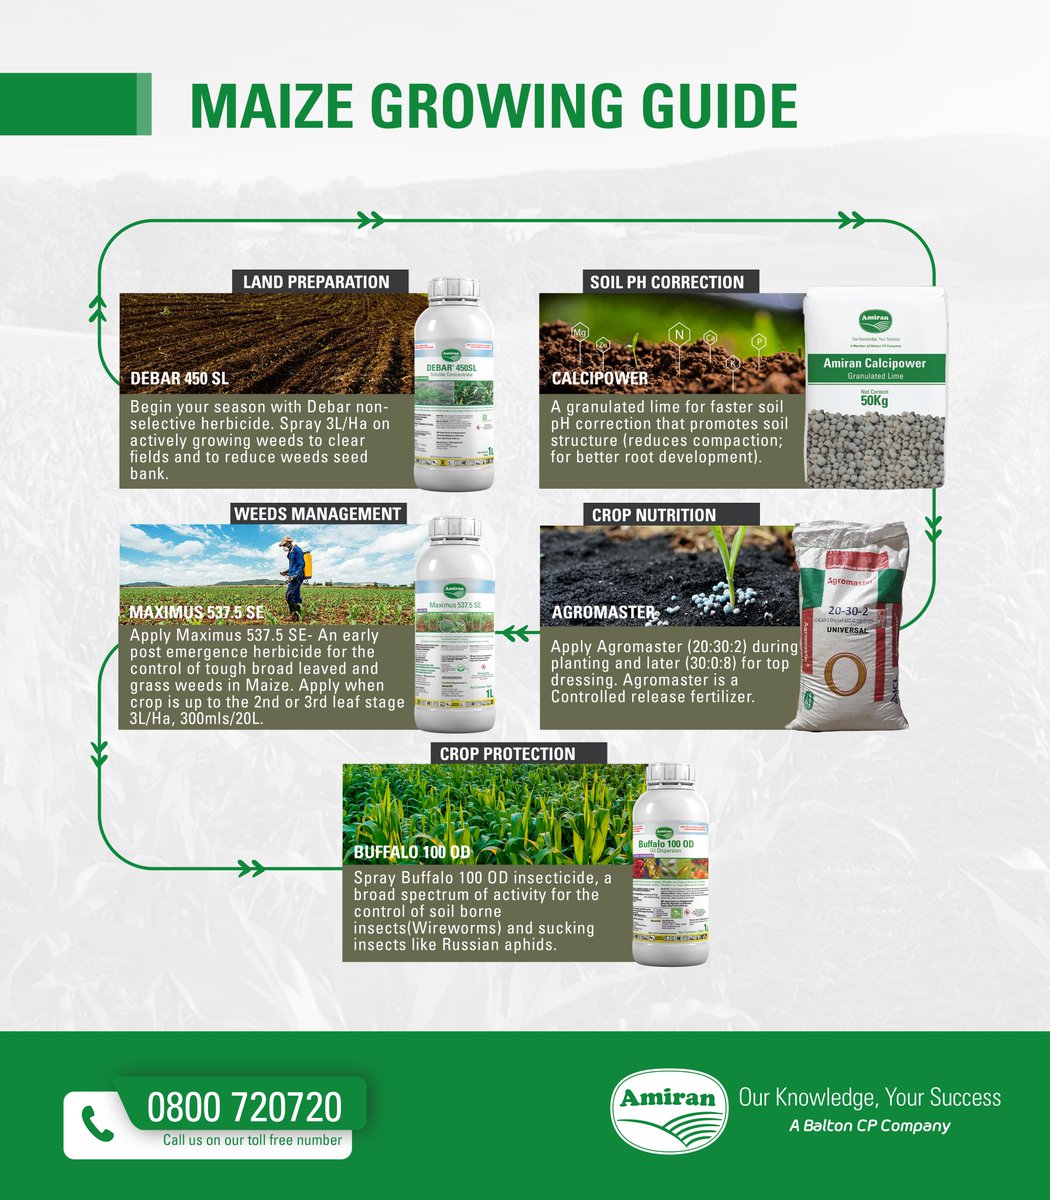 Don't just venture into Maize Farming, instead, farm the Amiran Way! Here is an effective maize guide to assist you navigate the initial challenges of maize farming during the first few weeks.